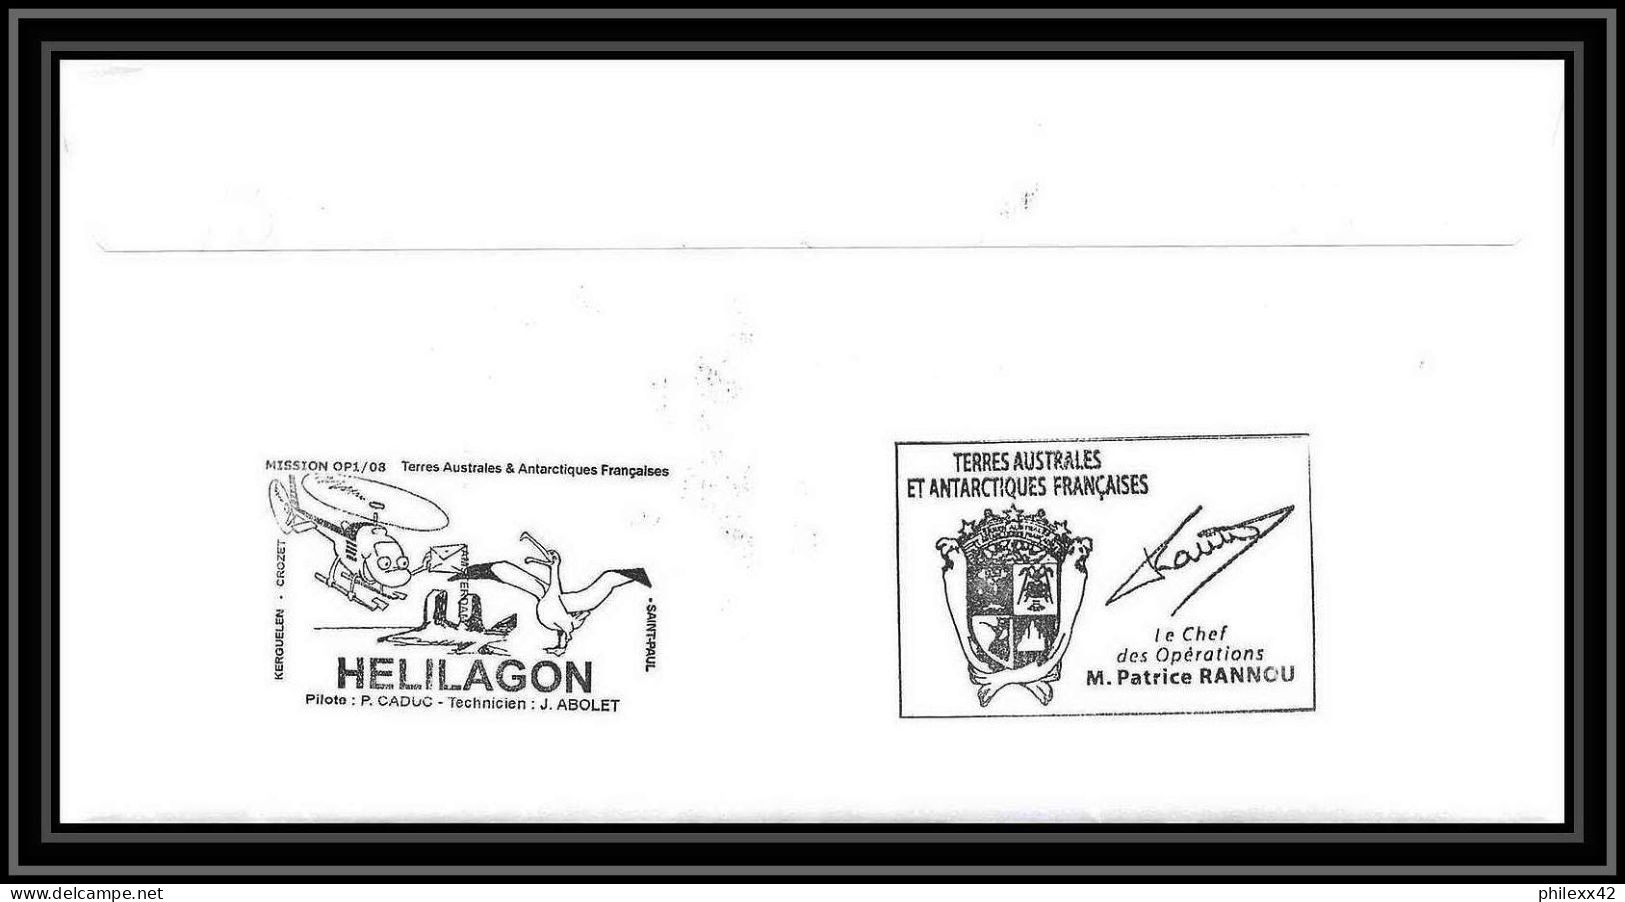 2784 Helilagon Terres Australes TAAF Lettre Cover Dufresne 2 Signé Signed Op 2008/1 Kerguelen 13/4/2008 PAQUEBOT - Helicopters